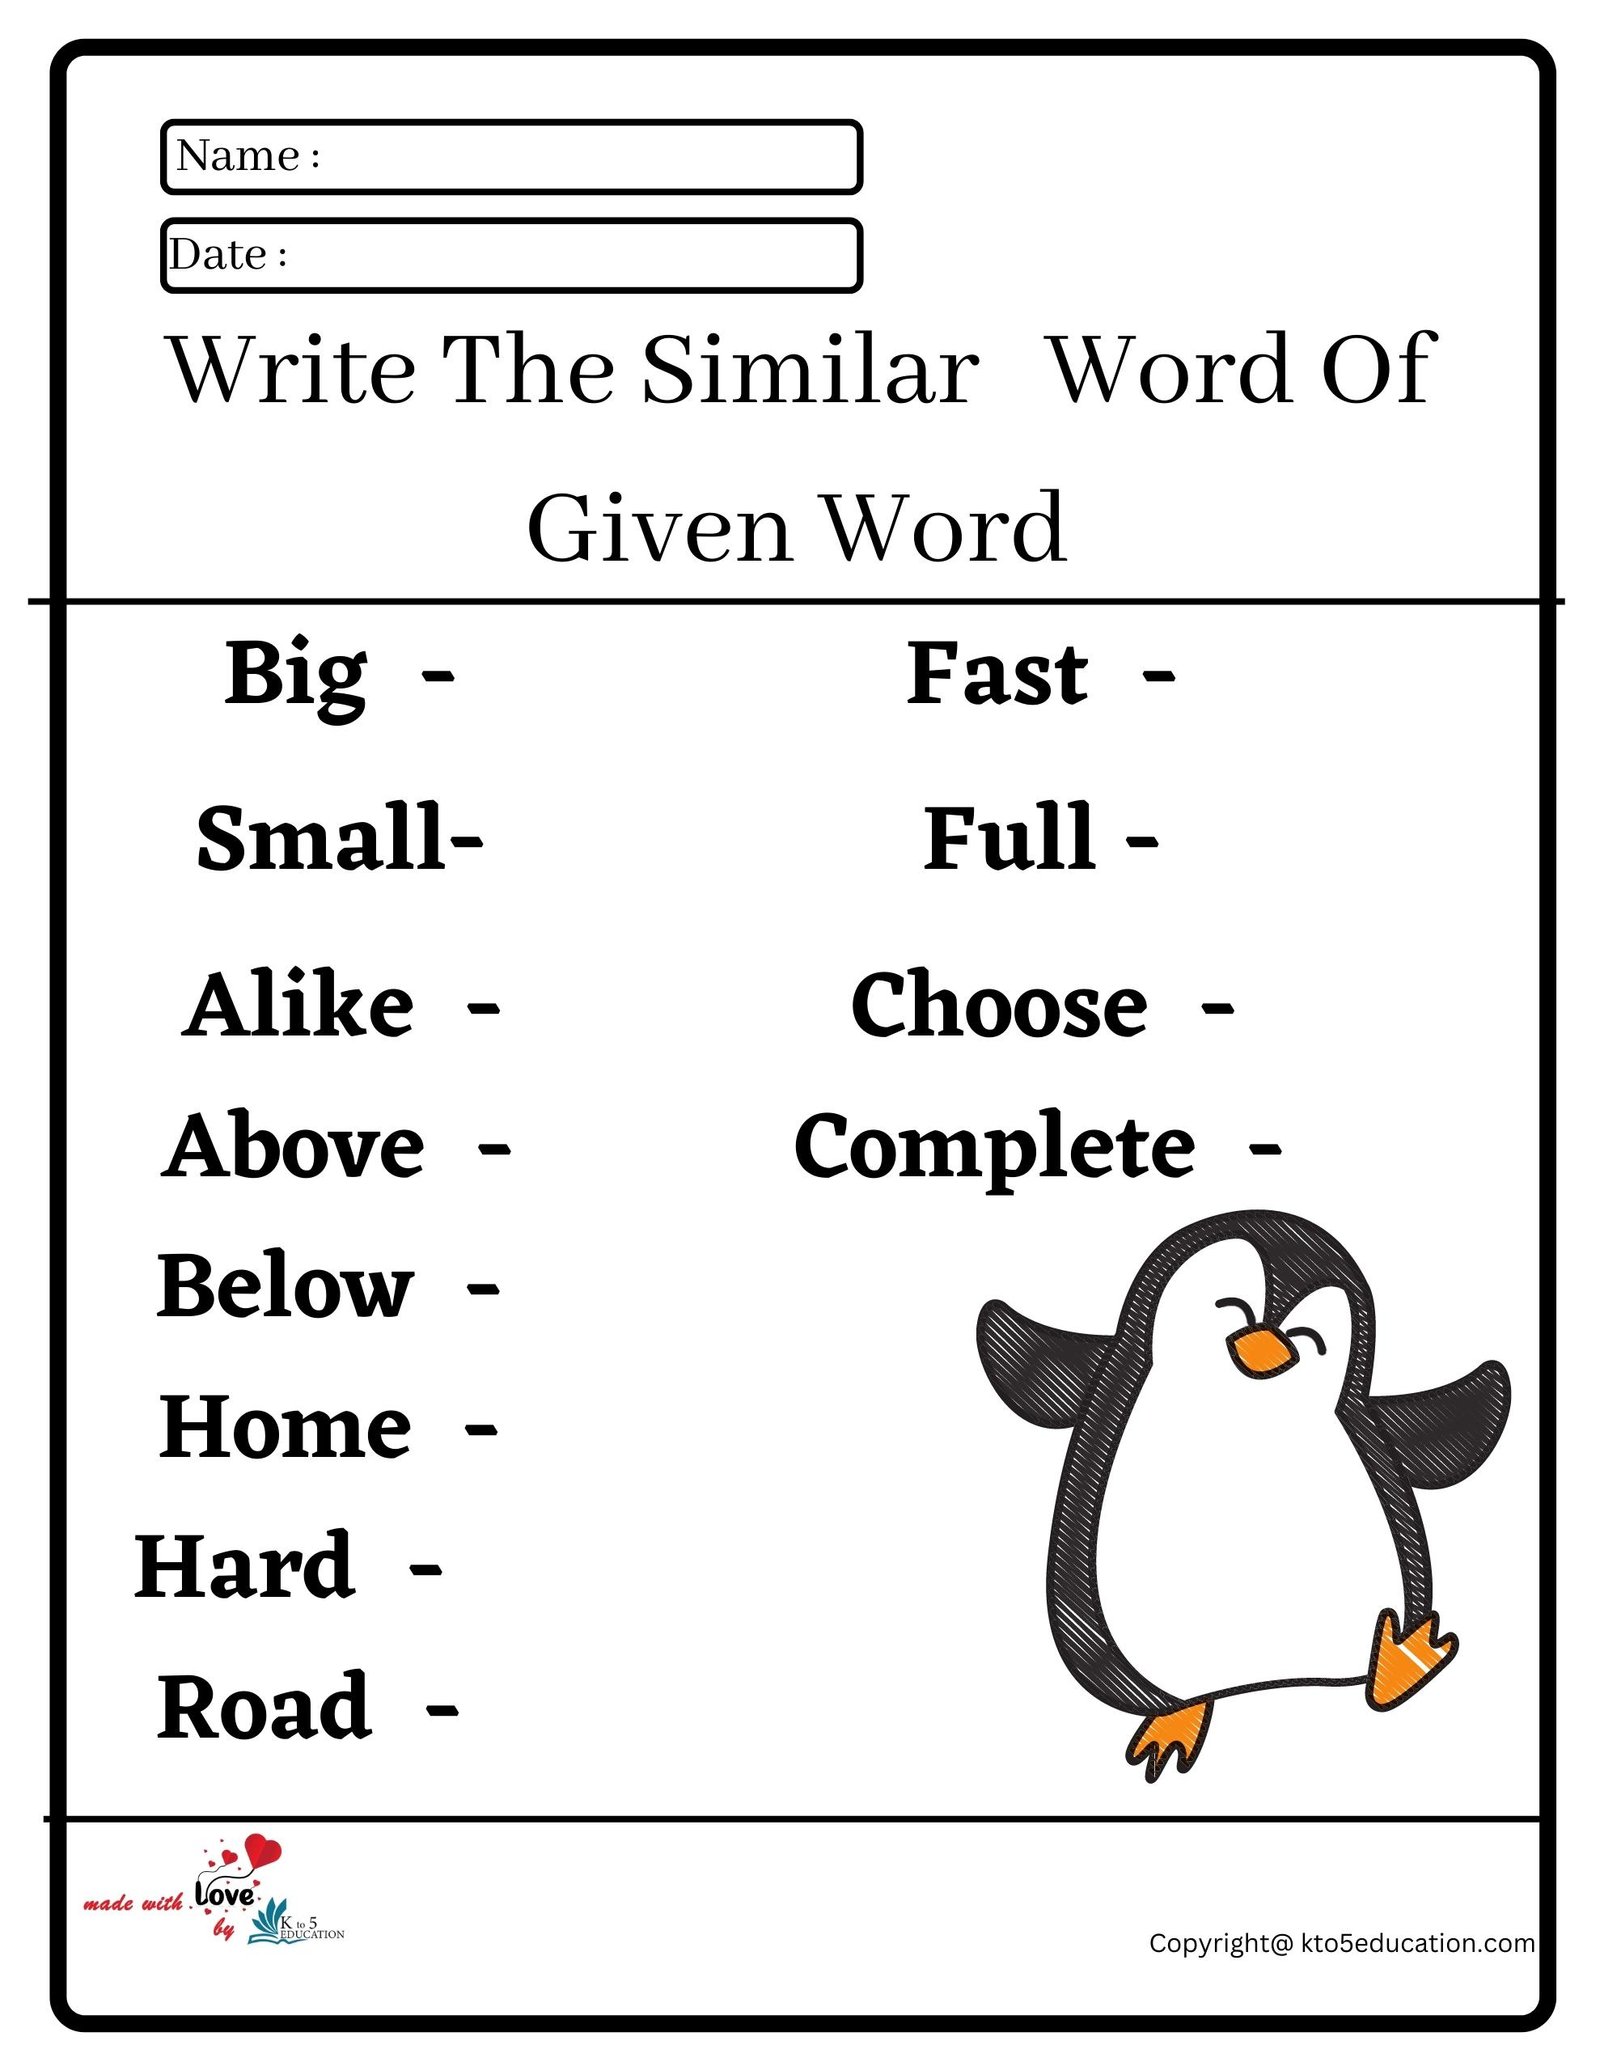 Write The Similar Word Of Given Word Worksheet 2